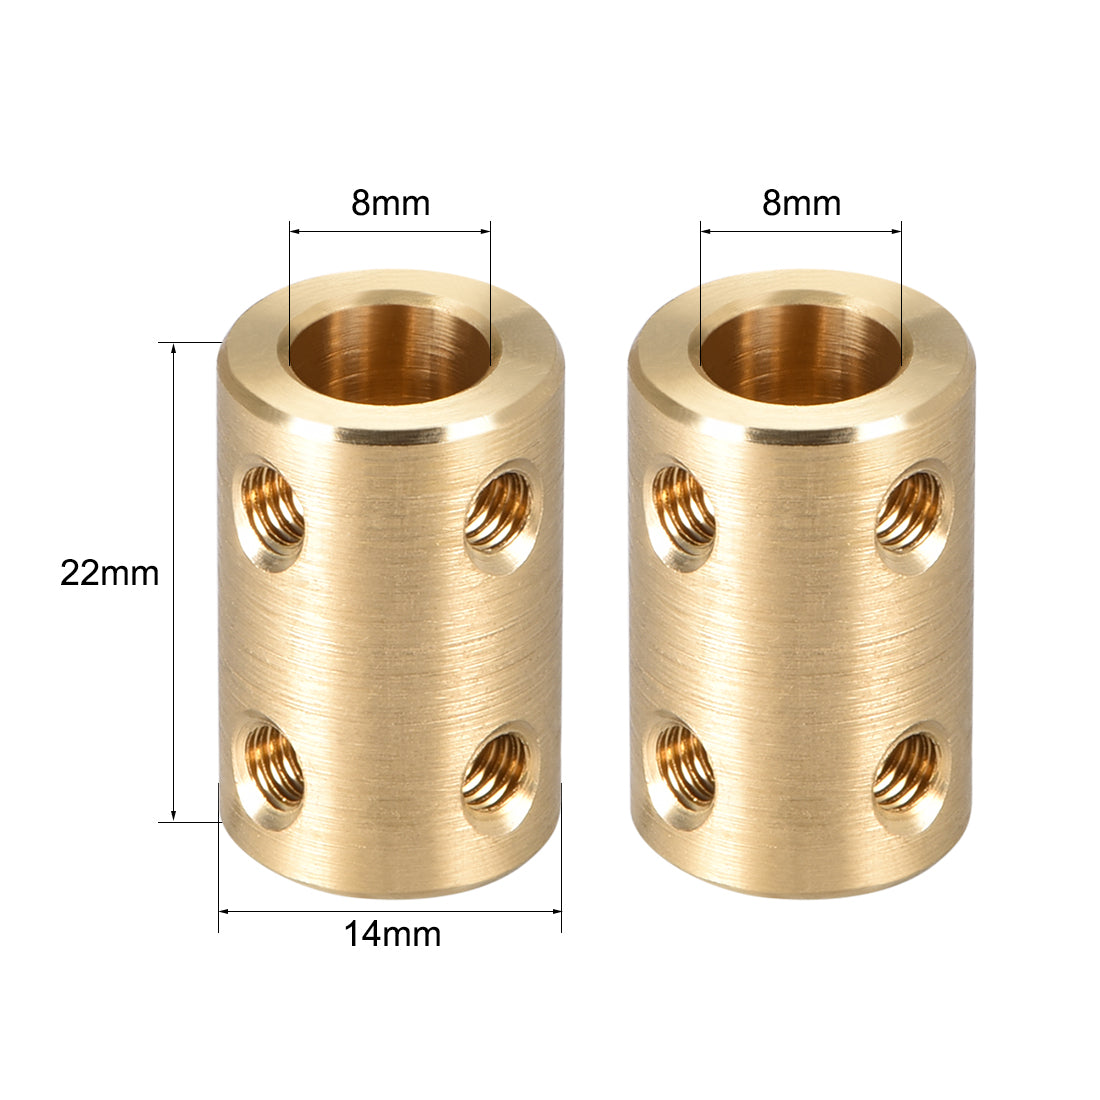 uxcell Uxcell Shaft Coupling 8mm to 8mm Bore L22xD14 Robot Motor Wheel Rigid Coupler Connector Gold Tone